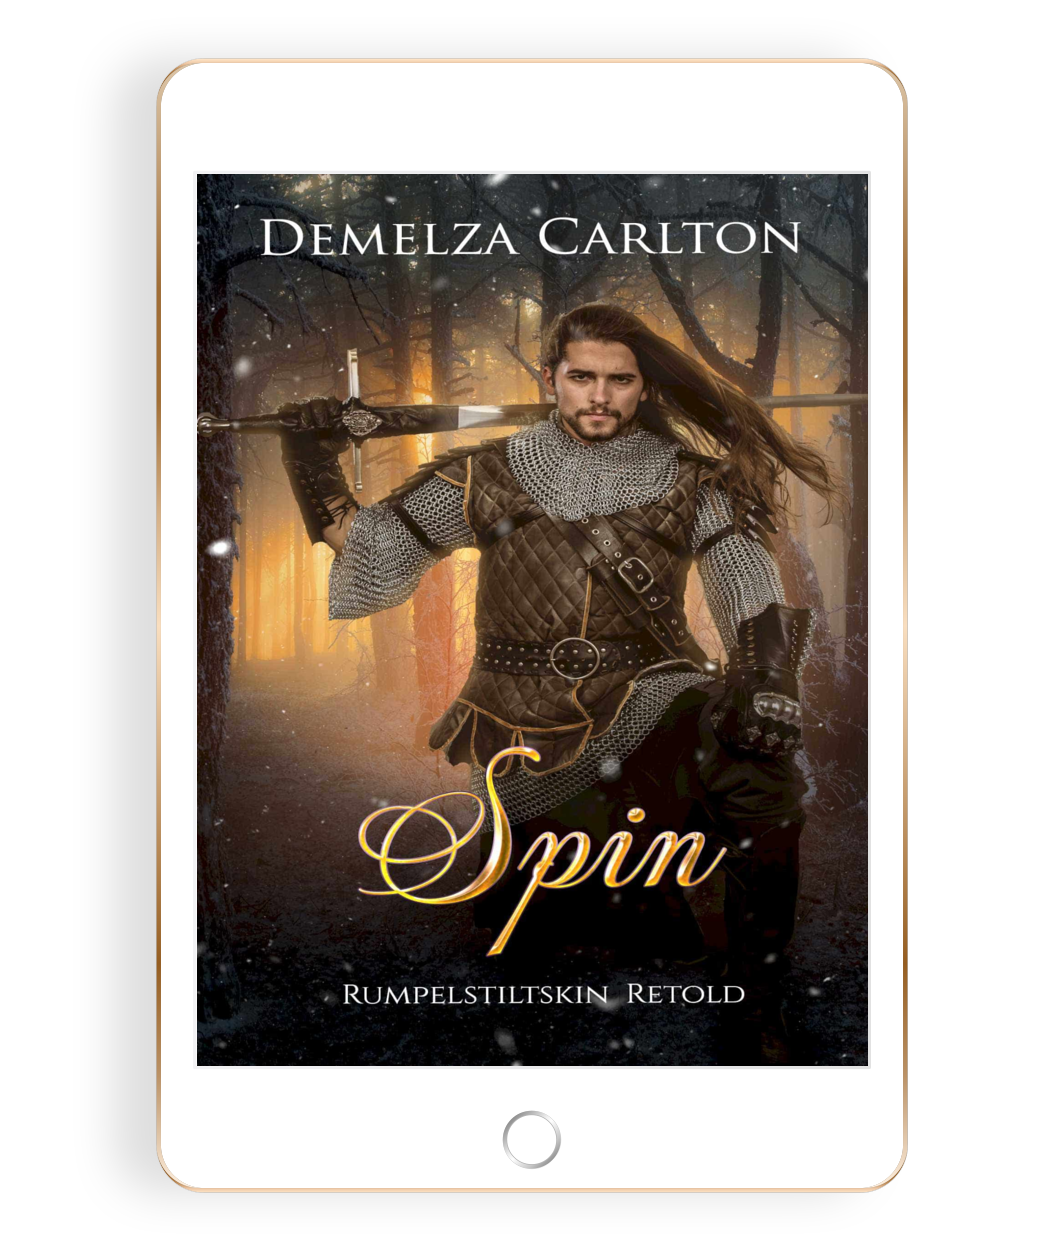 Spin: Rumpelstiltskin Retold Book 13 in the Romance a Medieval Fairytale series by USA Today Bestselling Author Demelza Carlton ebook